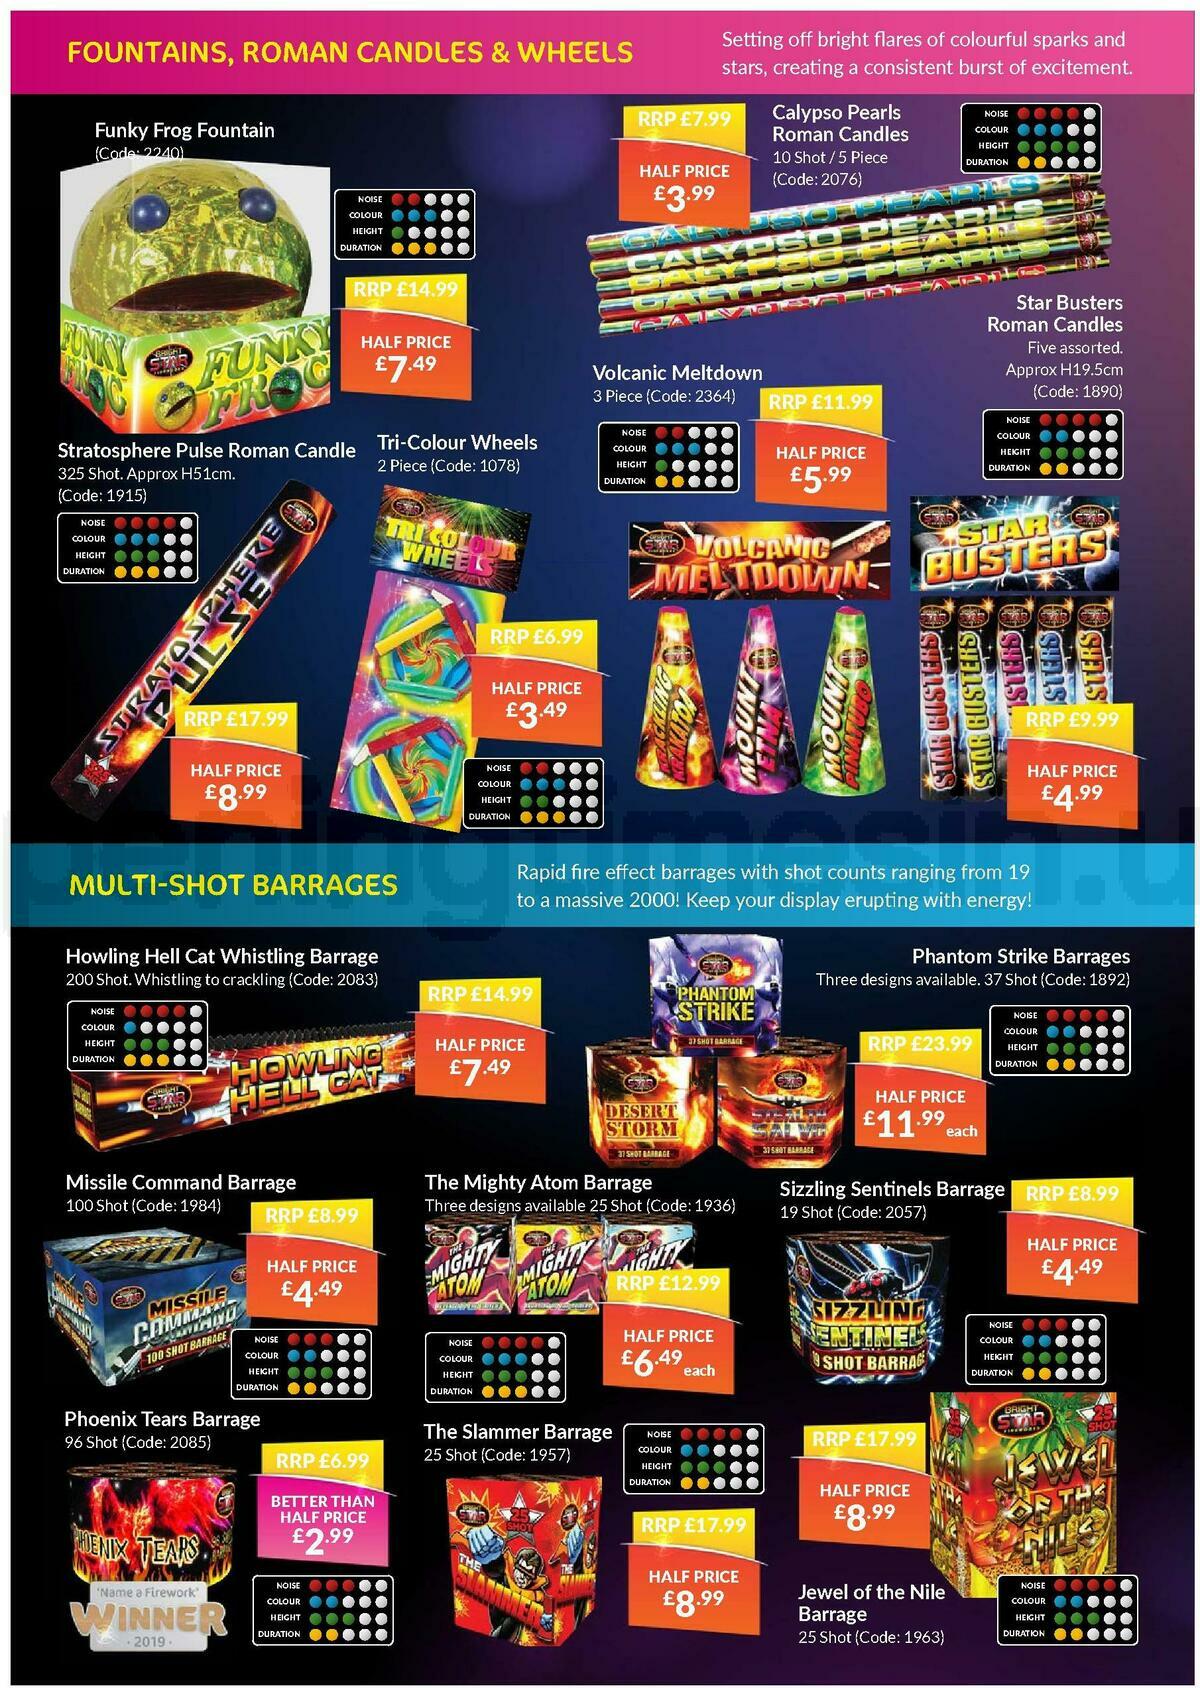 The Range Fireworks 2020 Offers from 15 October